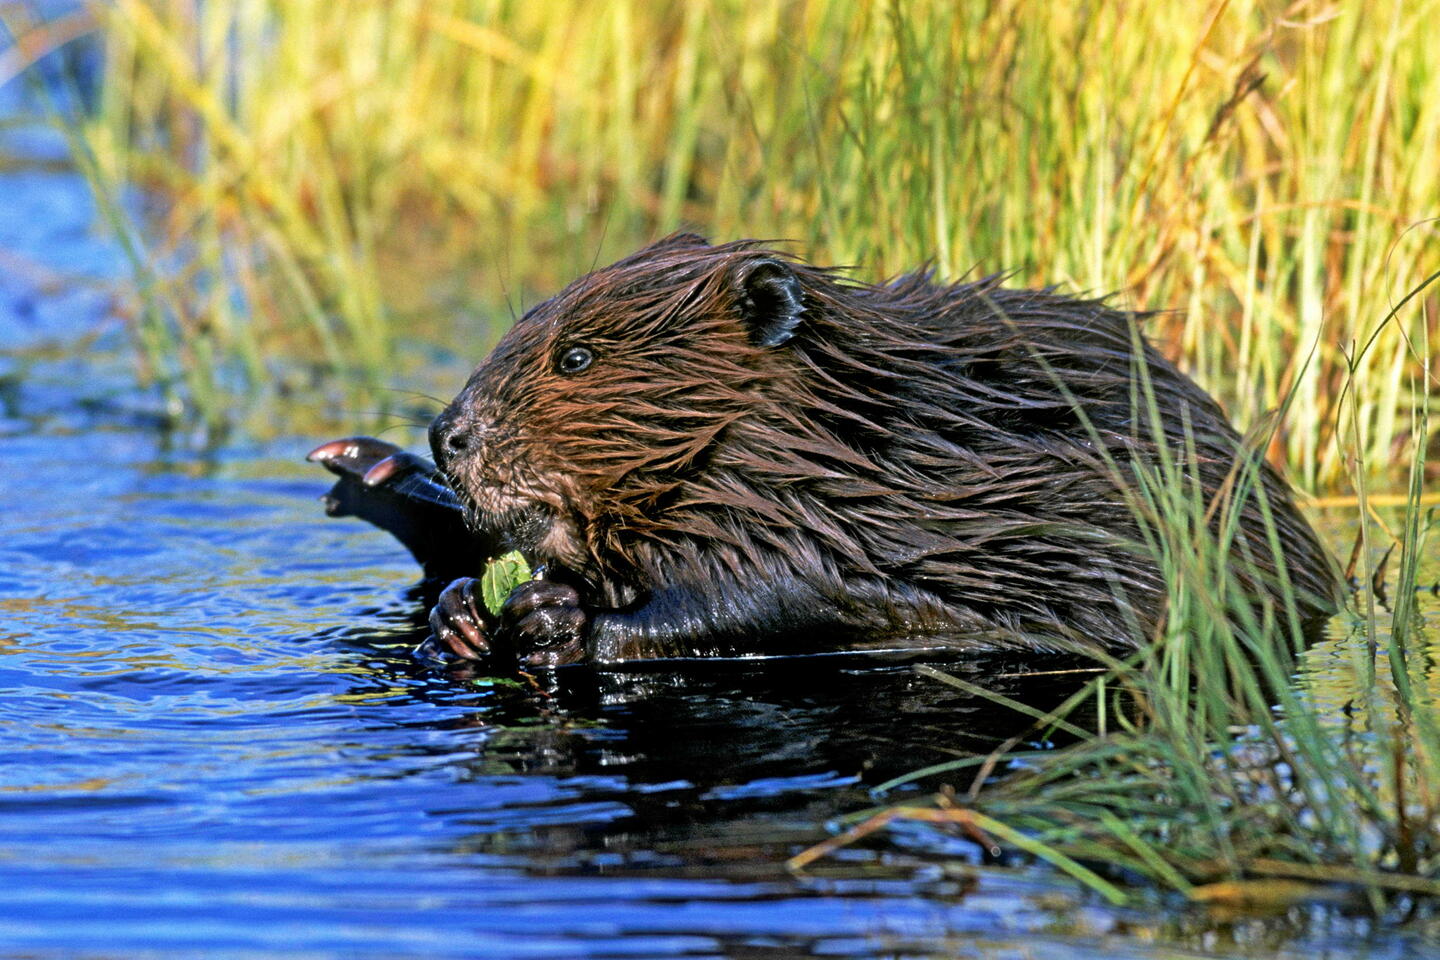 Spying on beavers from space could help save California